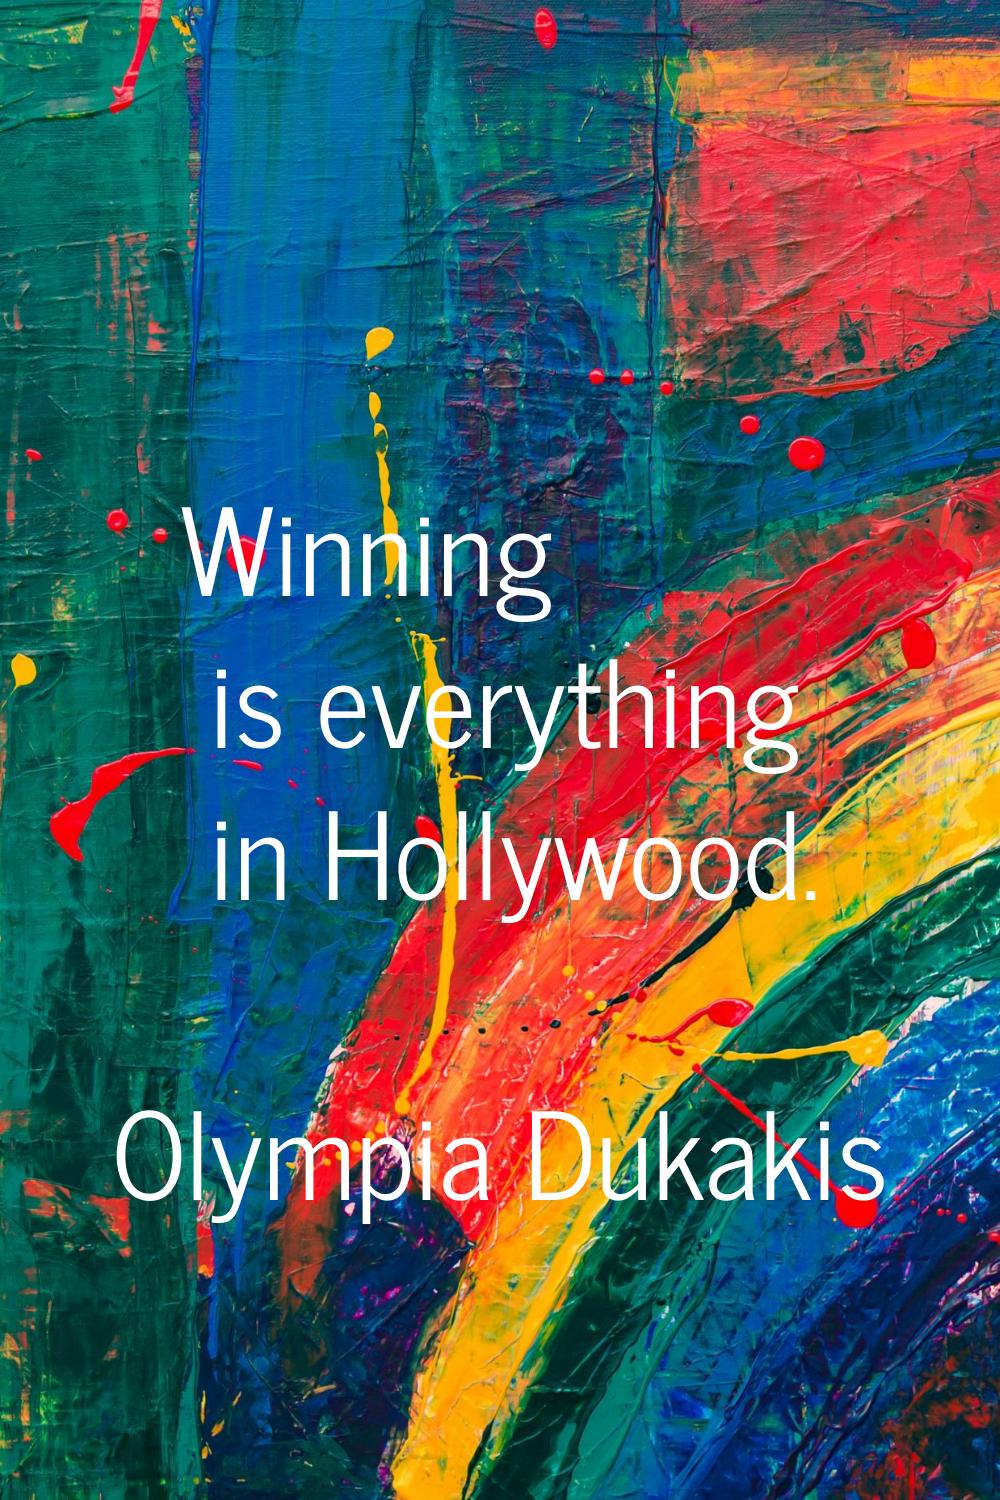 Winning is everything in Hollywood.